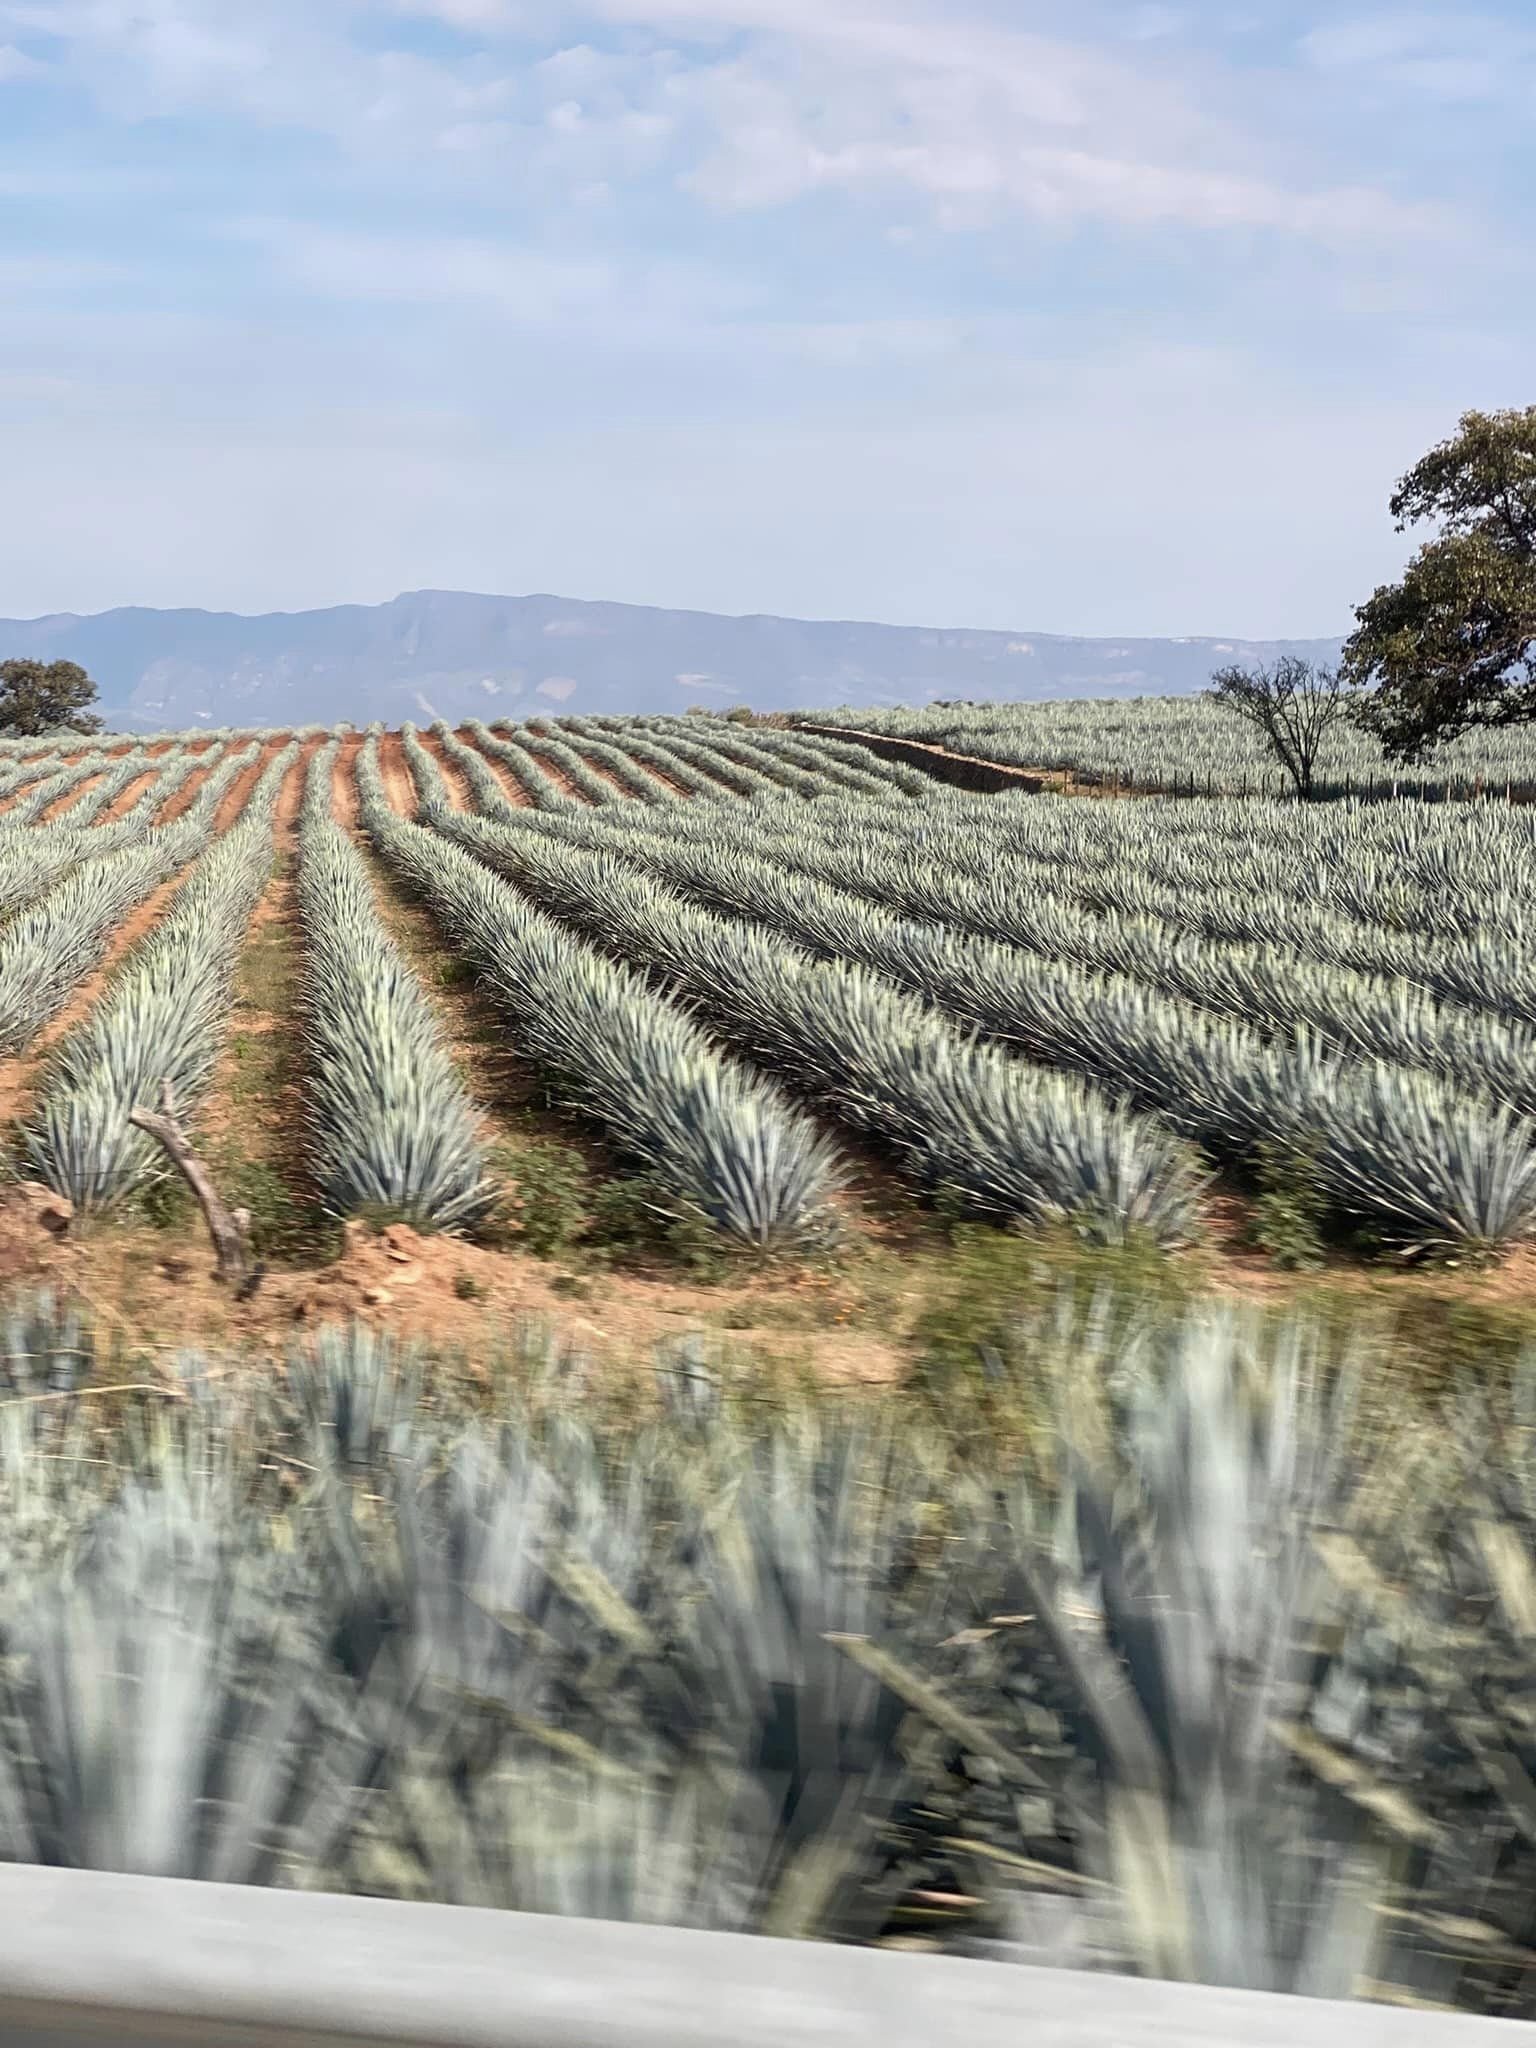 The famous Blue Agave is planted everywhere, including the highway right of way